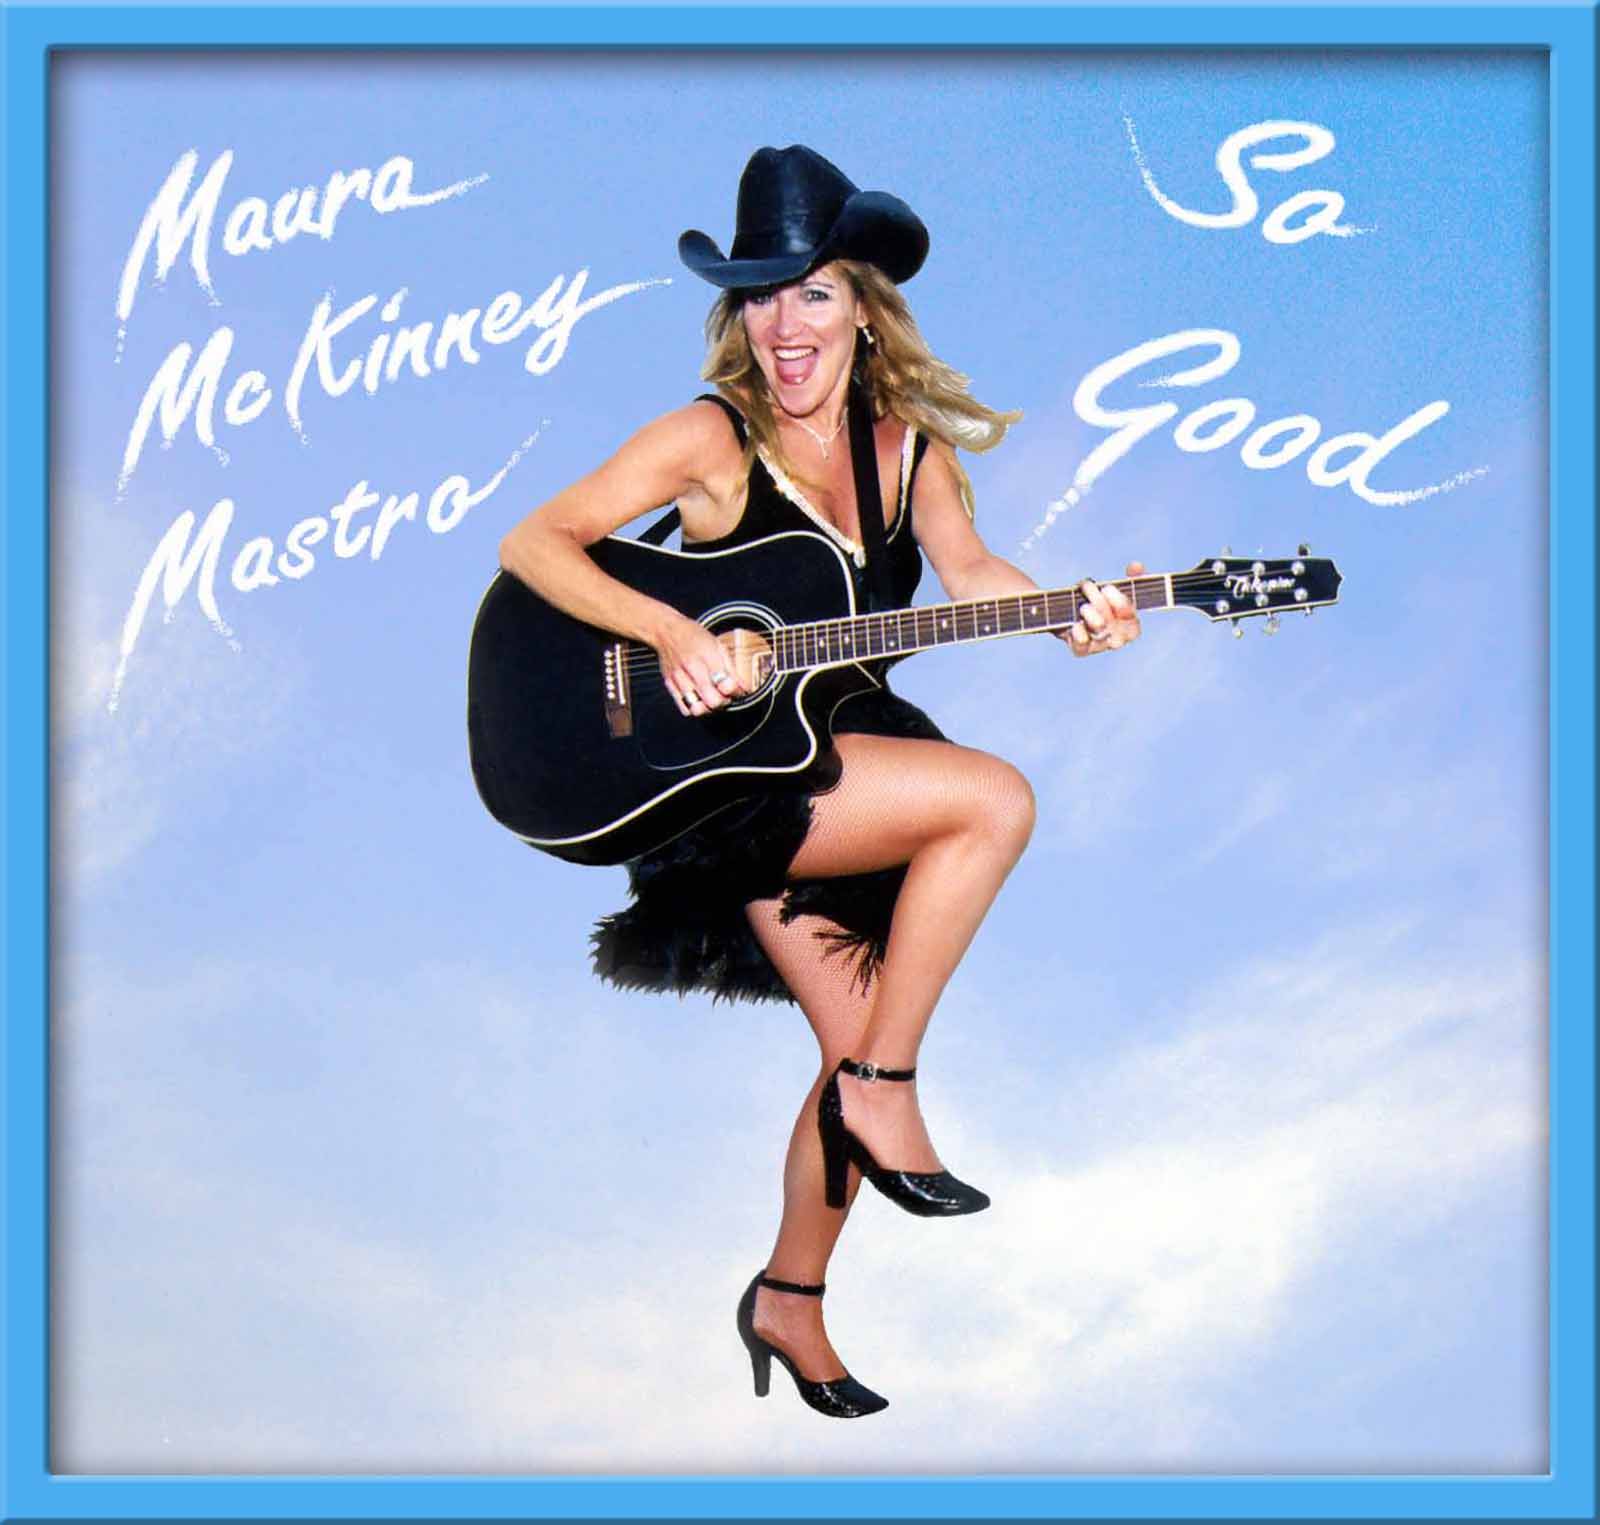 "So Good" is a collection of Maura's original songs, bound in lush Nashville sound, set down with Maura's rich range and lilt, and punctuated with rock and Celtic vibes...exciting music.